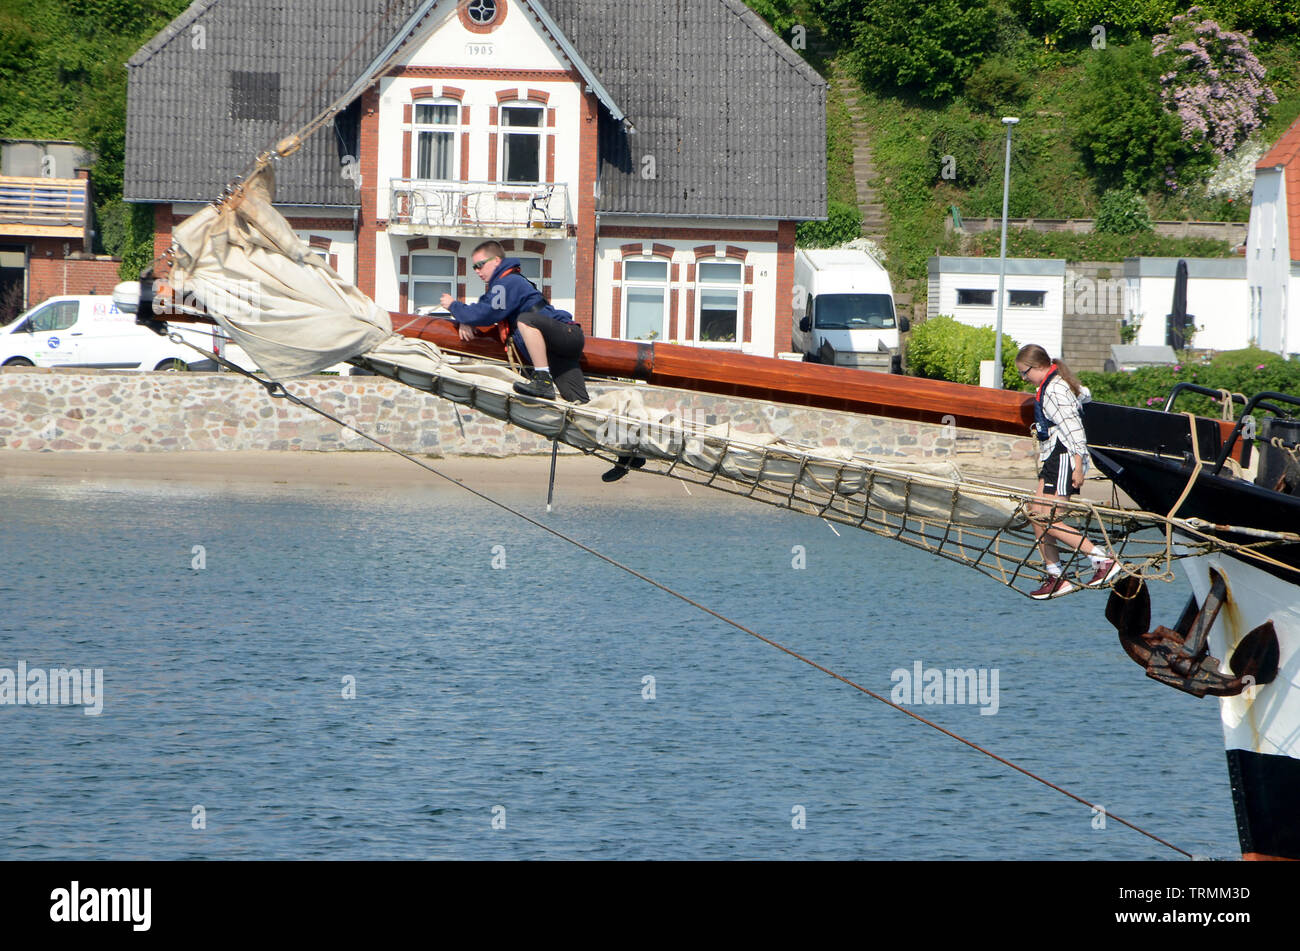 Sonderborg, Denmark - June 5, 2019: Two teenagers climb in the bowsprit net of the cruise ship Pegasus Stock Photo